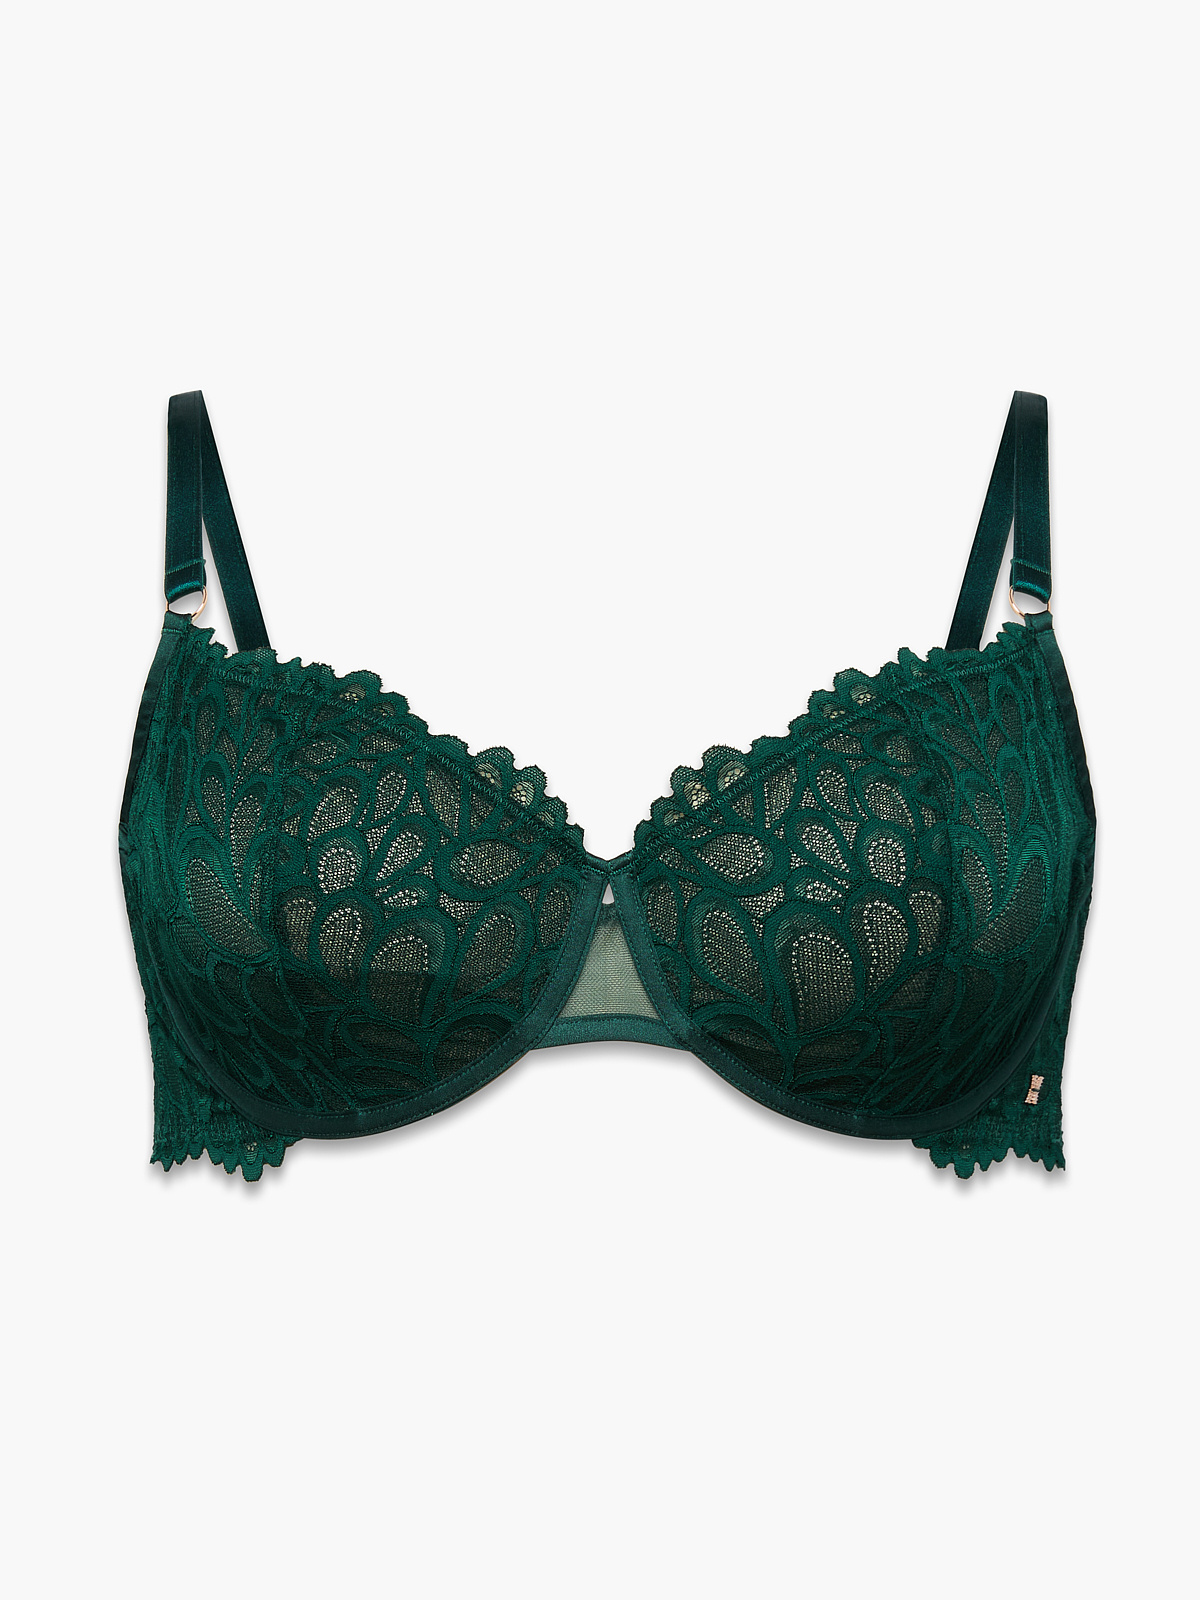 https://cdn.savagex.com/media/images/products/BA2458493-3156/SAVAGE-NOT-SORRY-UNLINED-LACE-BALCONETTE-BRA-BA2458493-3156-LAYDOWN-1200x1600.jpg